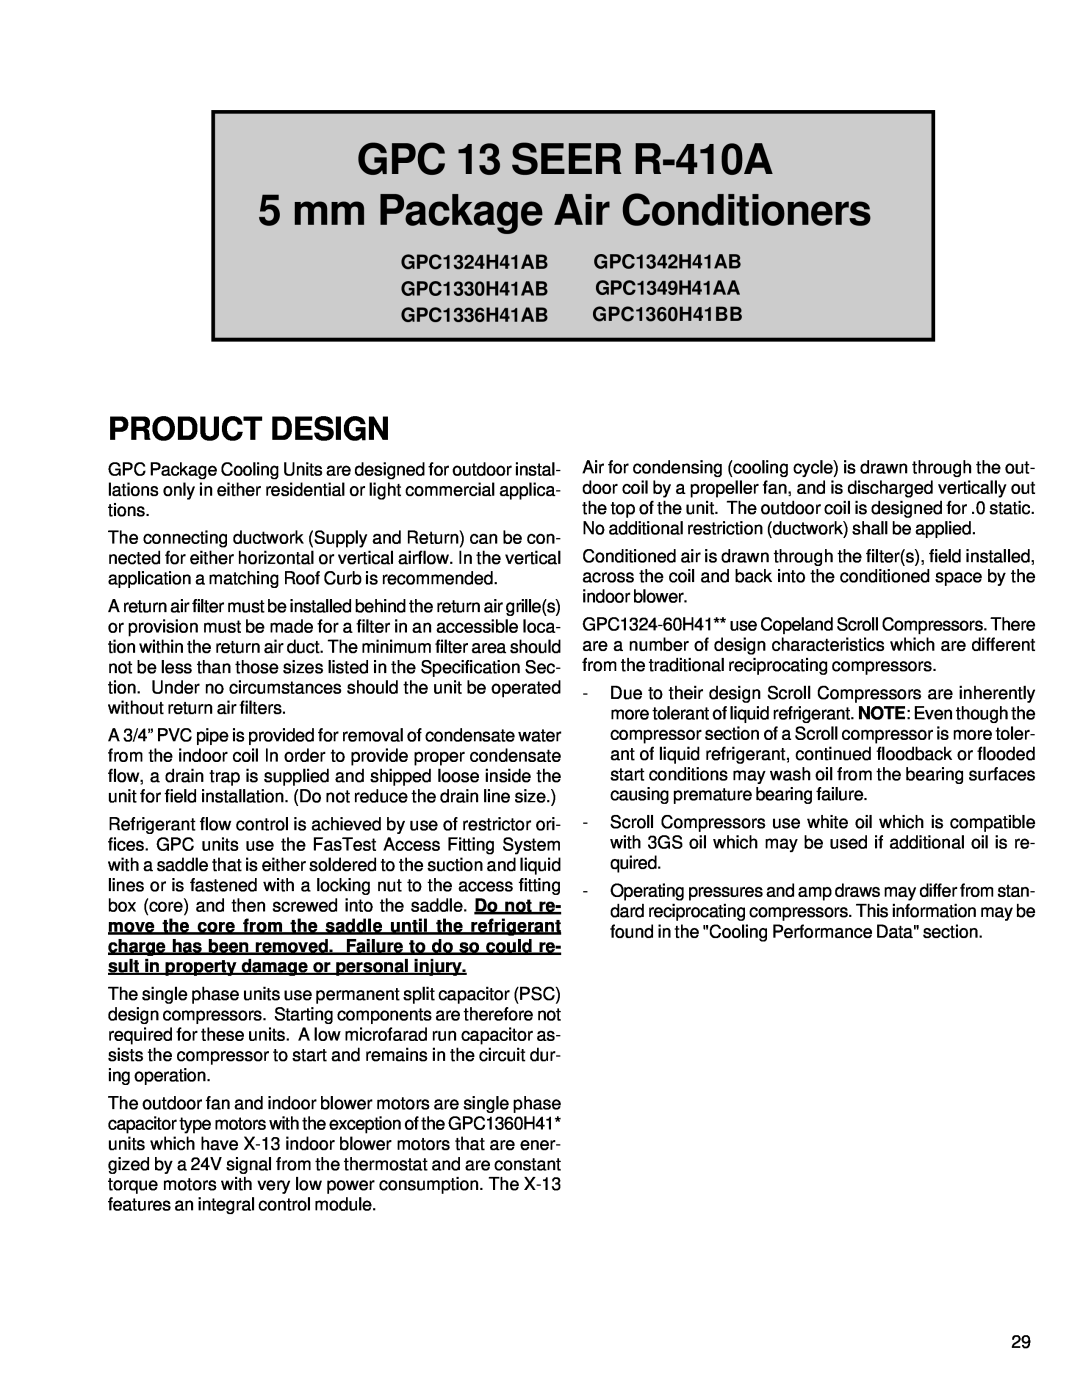 Goodmans service manual GPC 13 SEER R-410A 5 mm Package Air Conditioners, Product Design, GPC1324H41AB GPC1342H41AB 